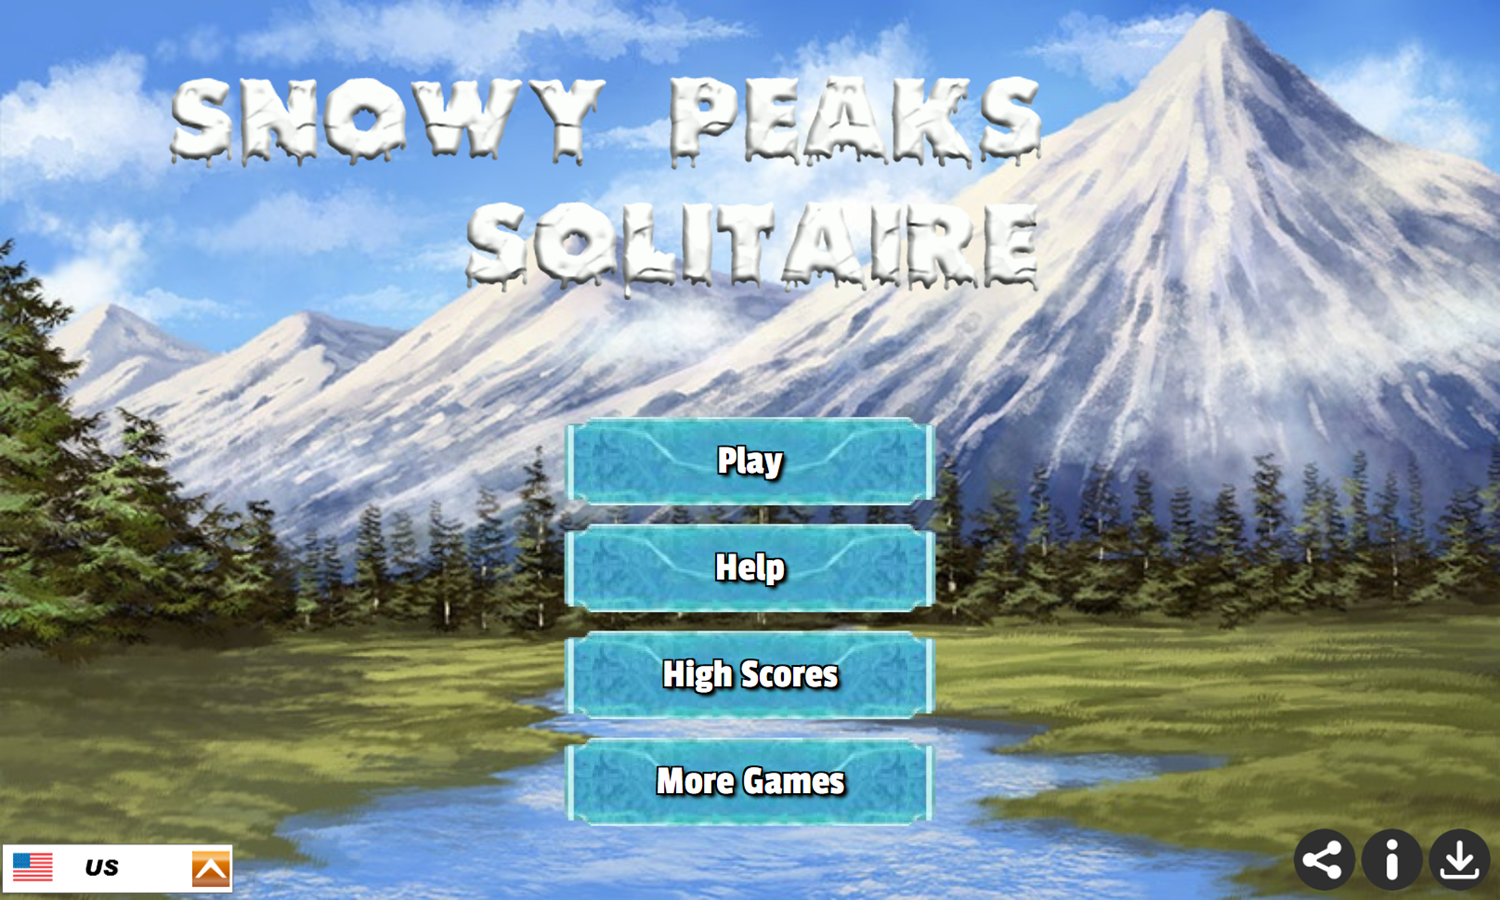 Snowy Peaks Solitaire Game Welcome Screen Screenshot.